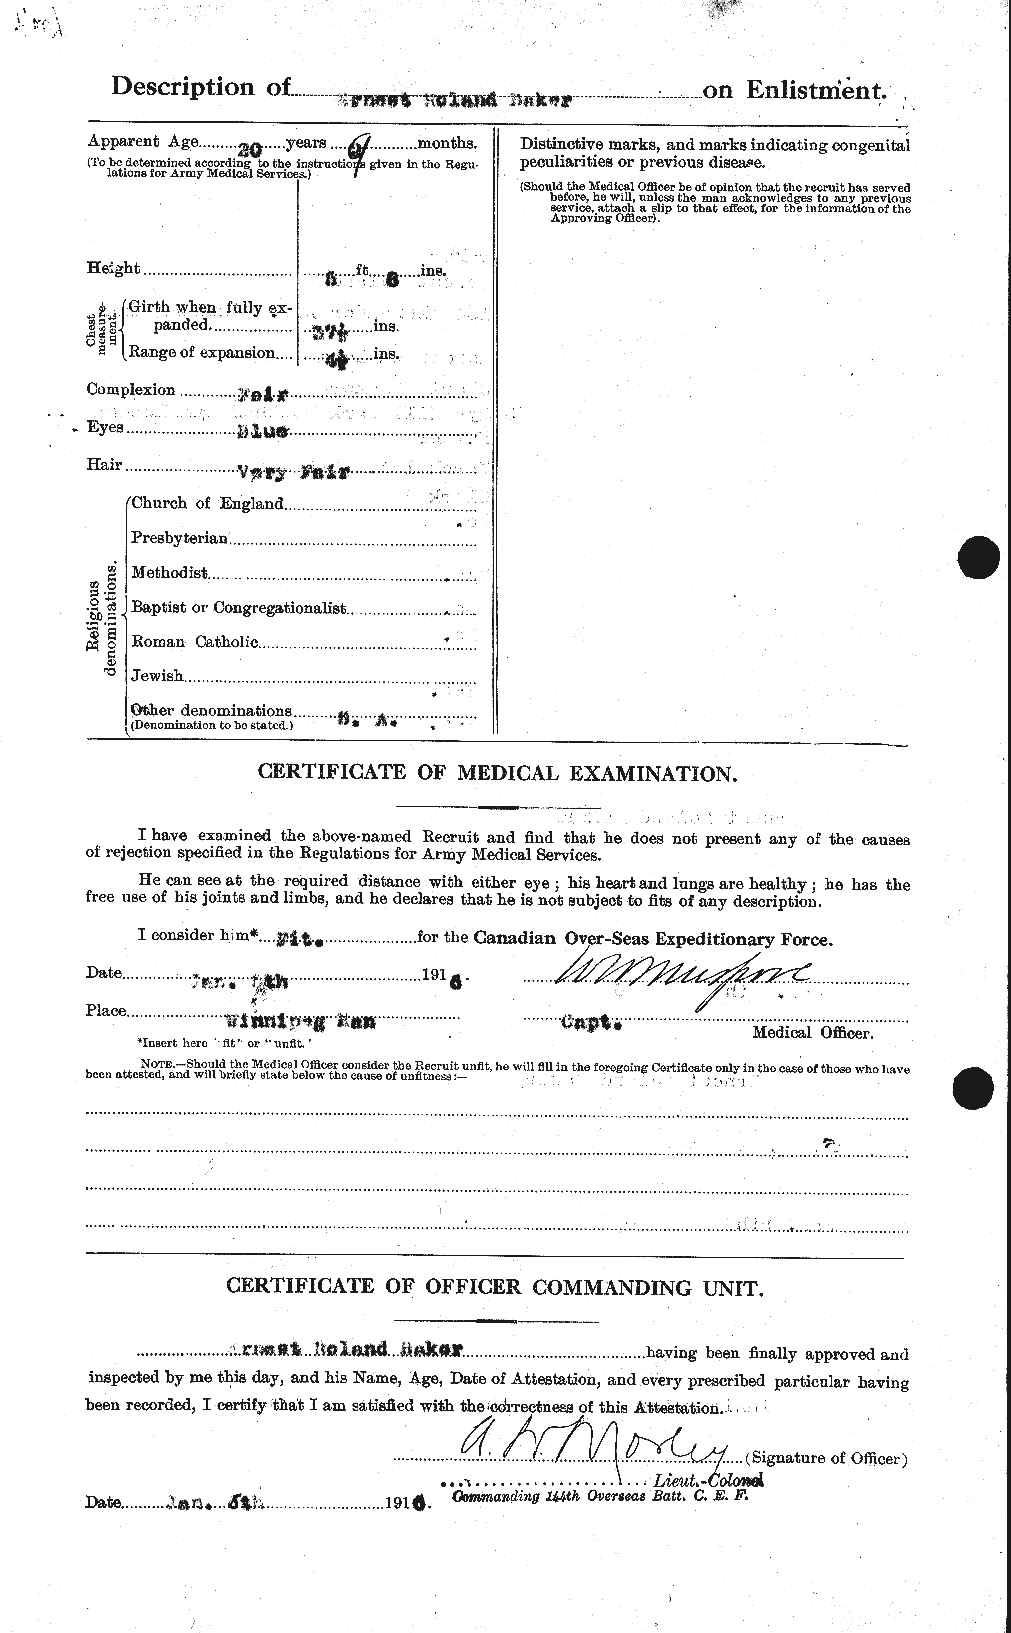 Personnel Records of the First World War - CEF 216340b